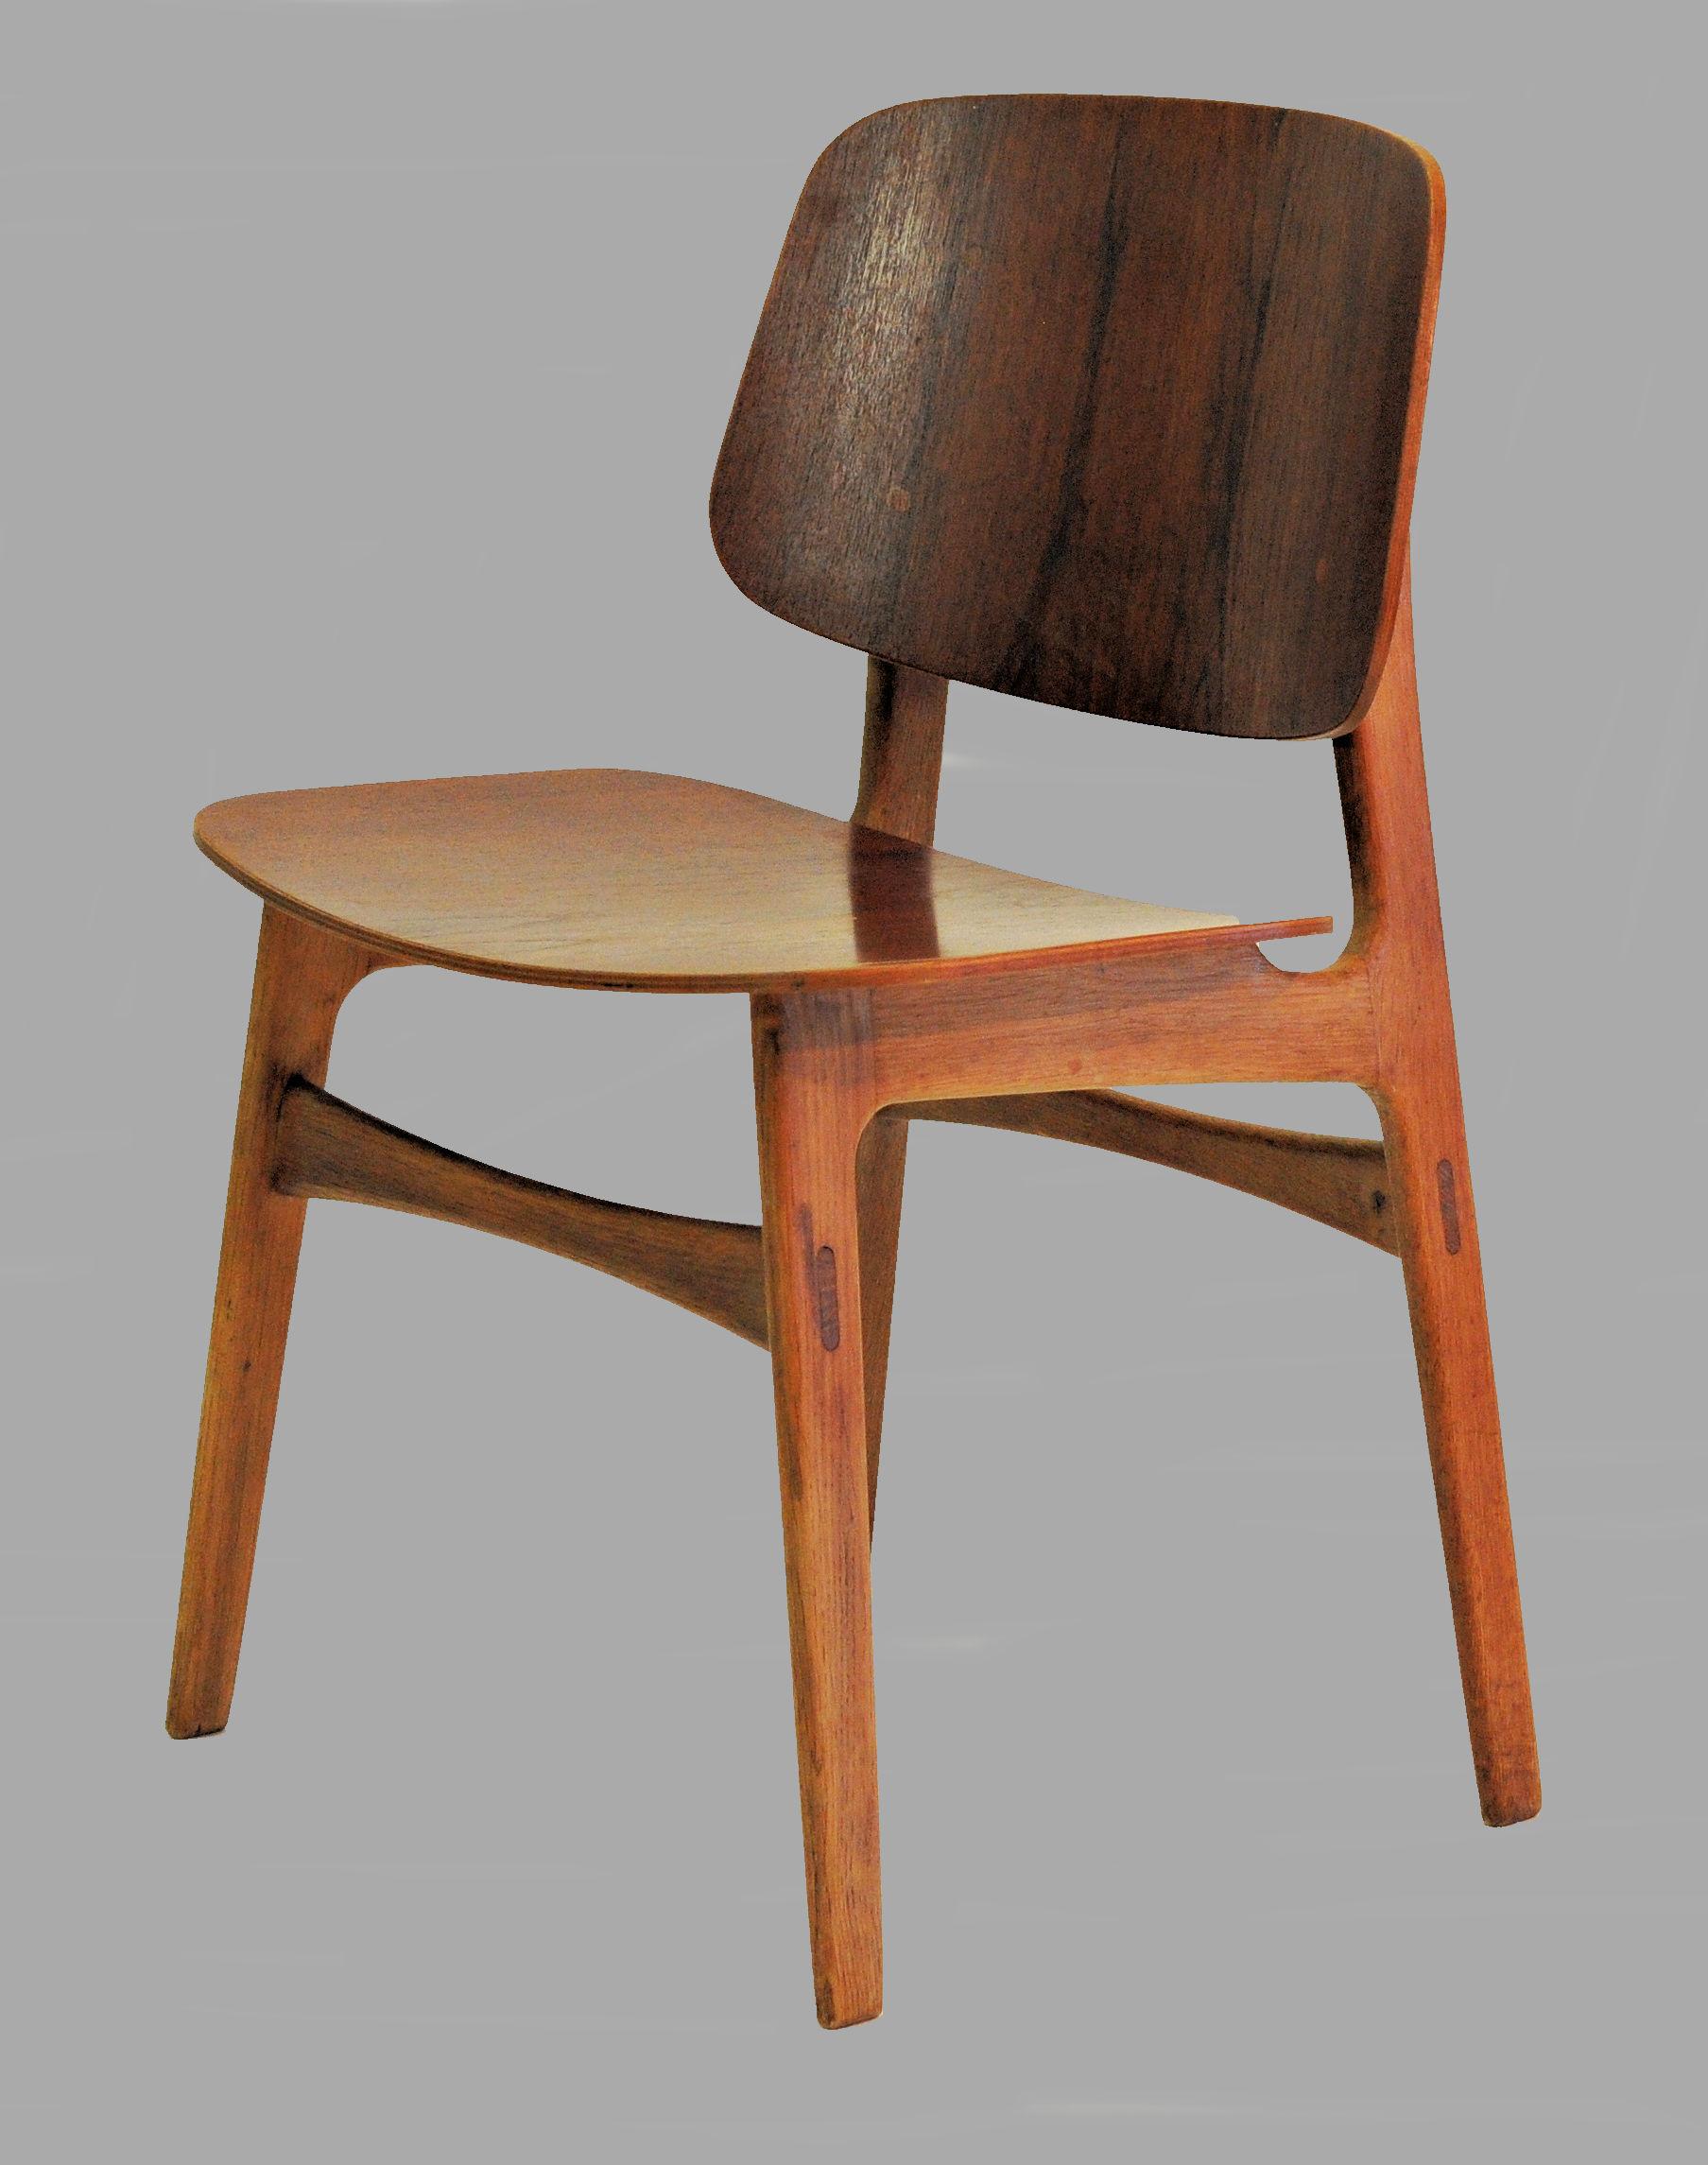 1950s Borge Mogensen Set of Two Shell Chairs in Oak and Teak In Good Condition For Sale In Knebel, DK